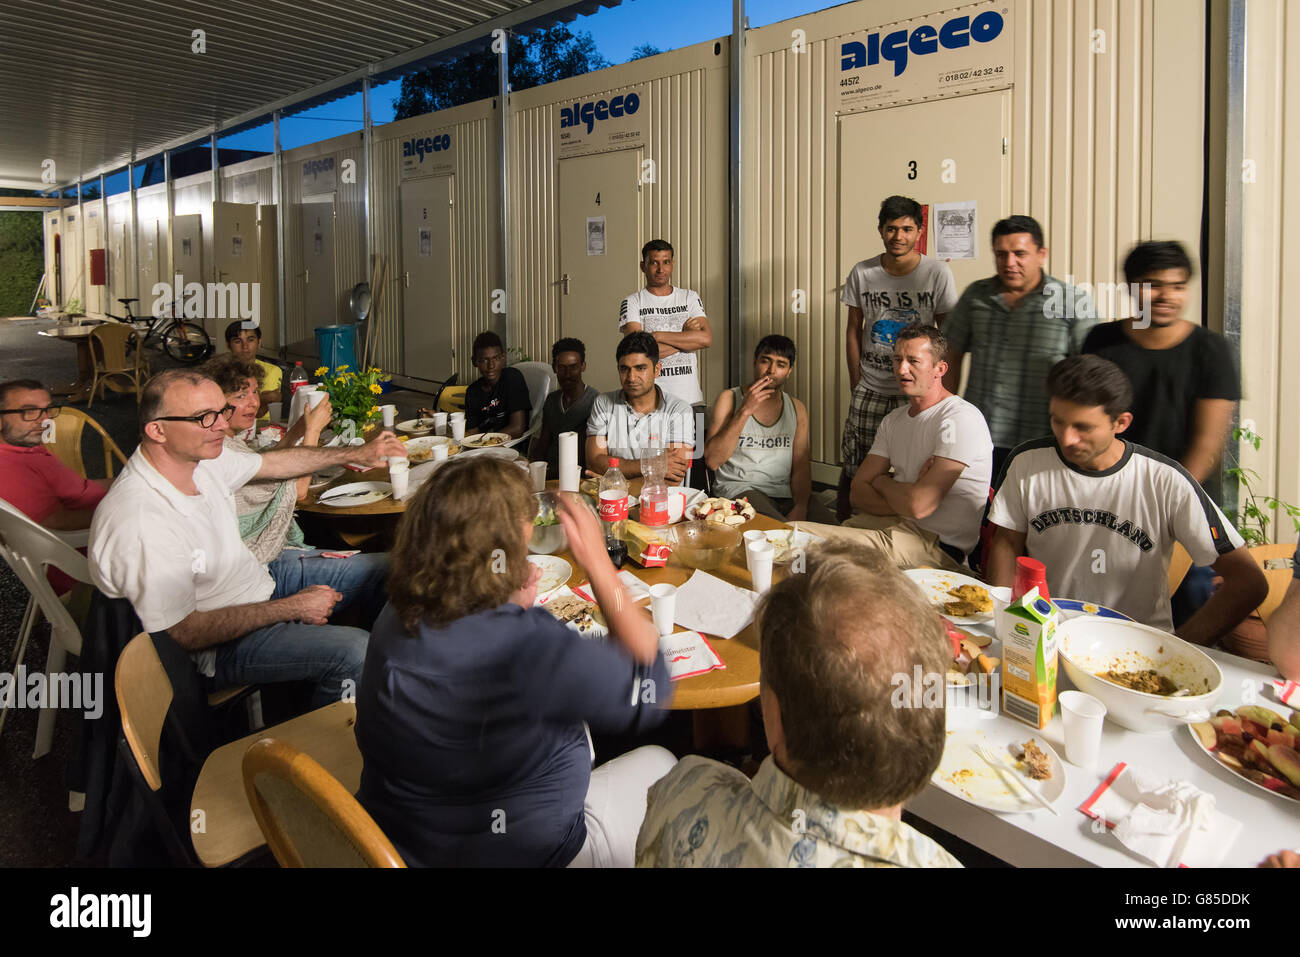 Scharnhausen, Germany - June 22.06.2016: Male Muslim refugees and German volunteers (men and women) sit together eating dinner d Stock Photo